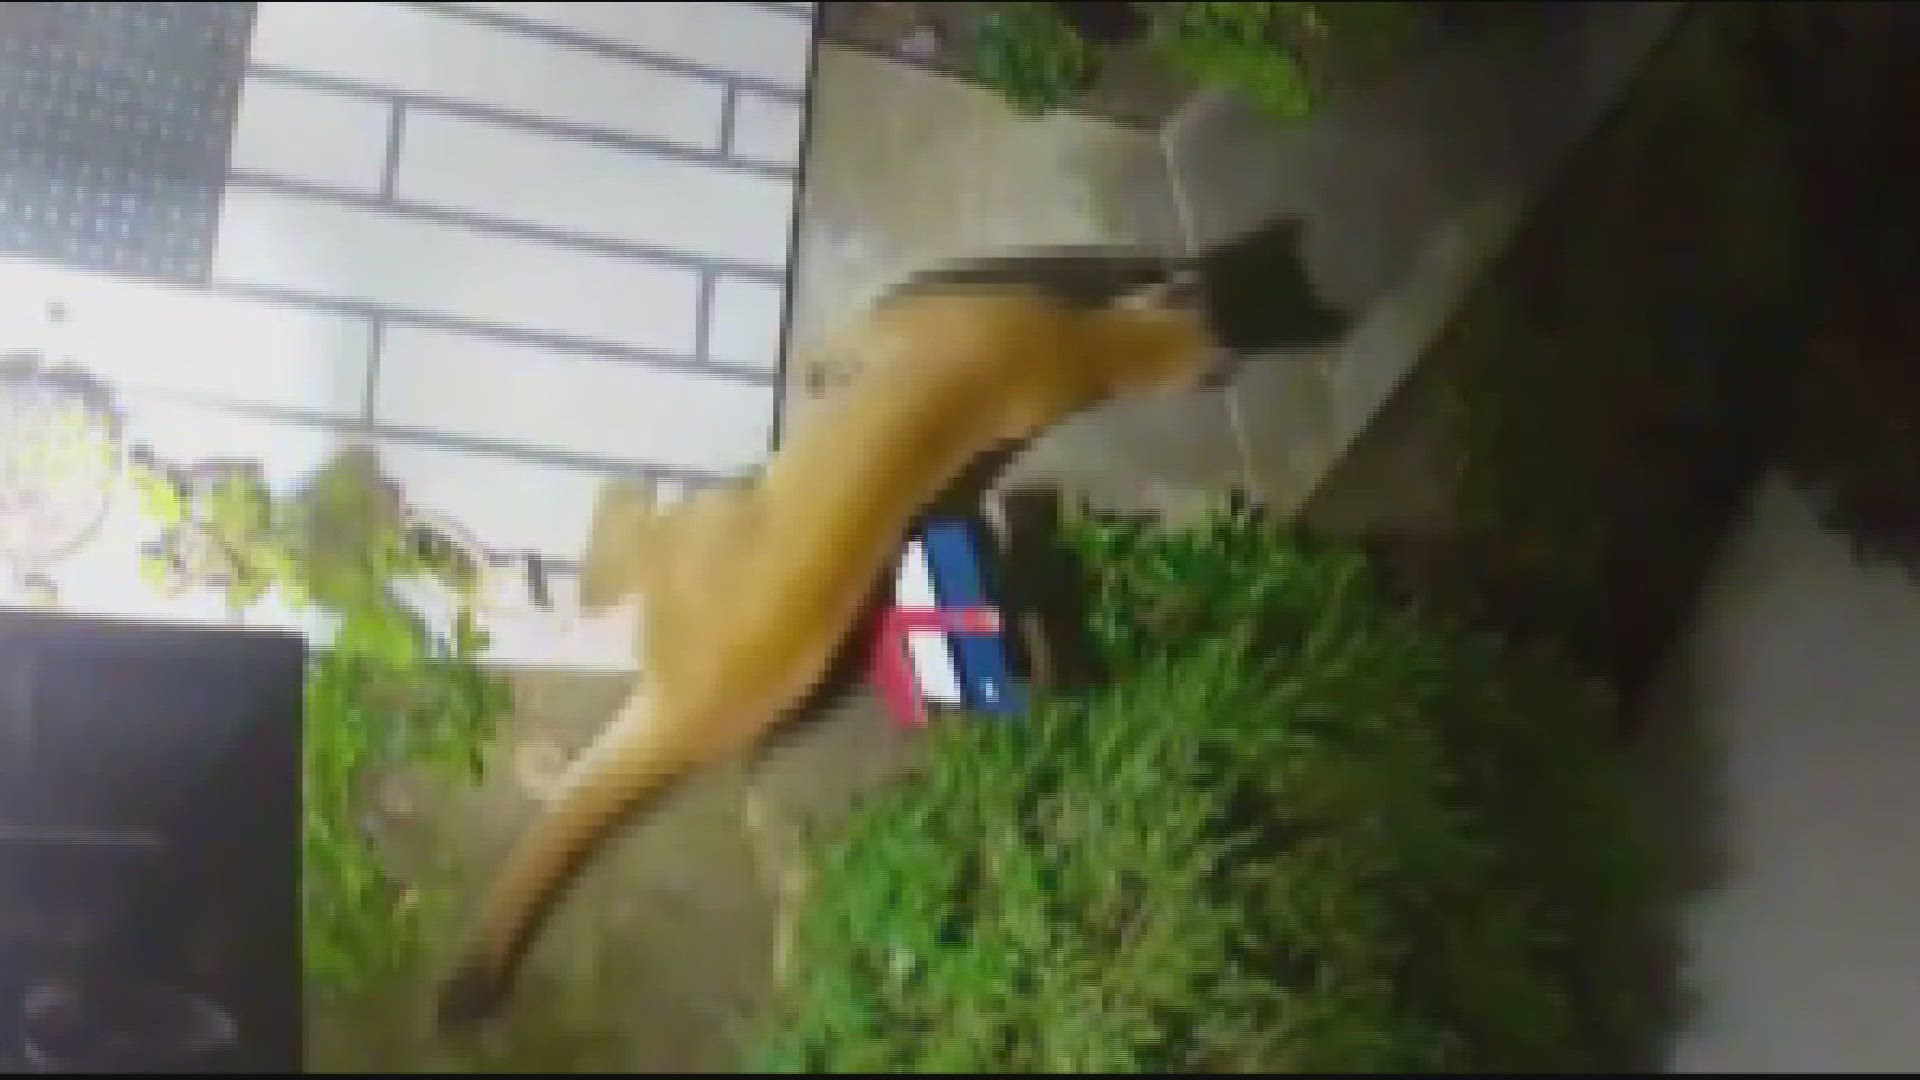 The mountain lion was caught on camera overnight, roaming around the front porch of a woman's home near Westonhill Drive and Mira Mesa Boulevard.